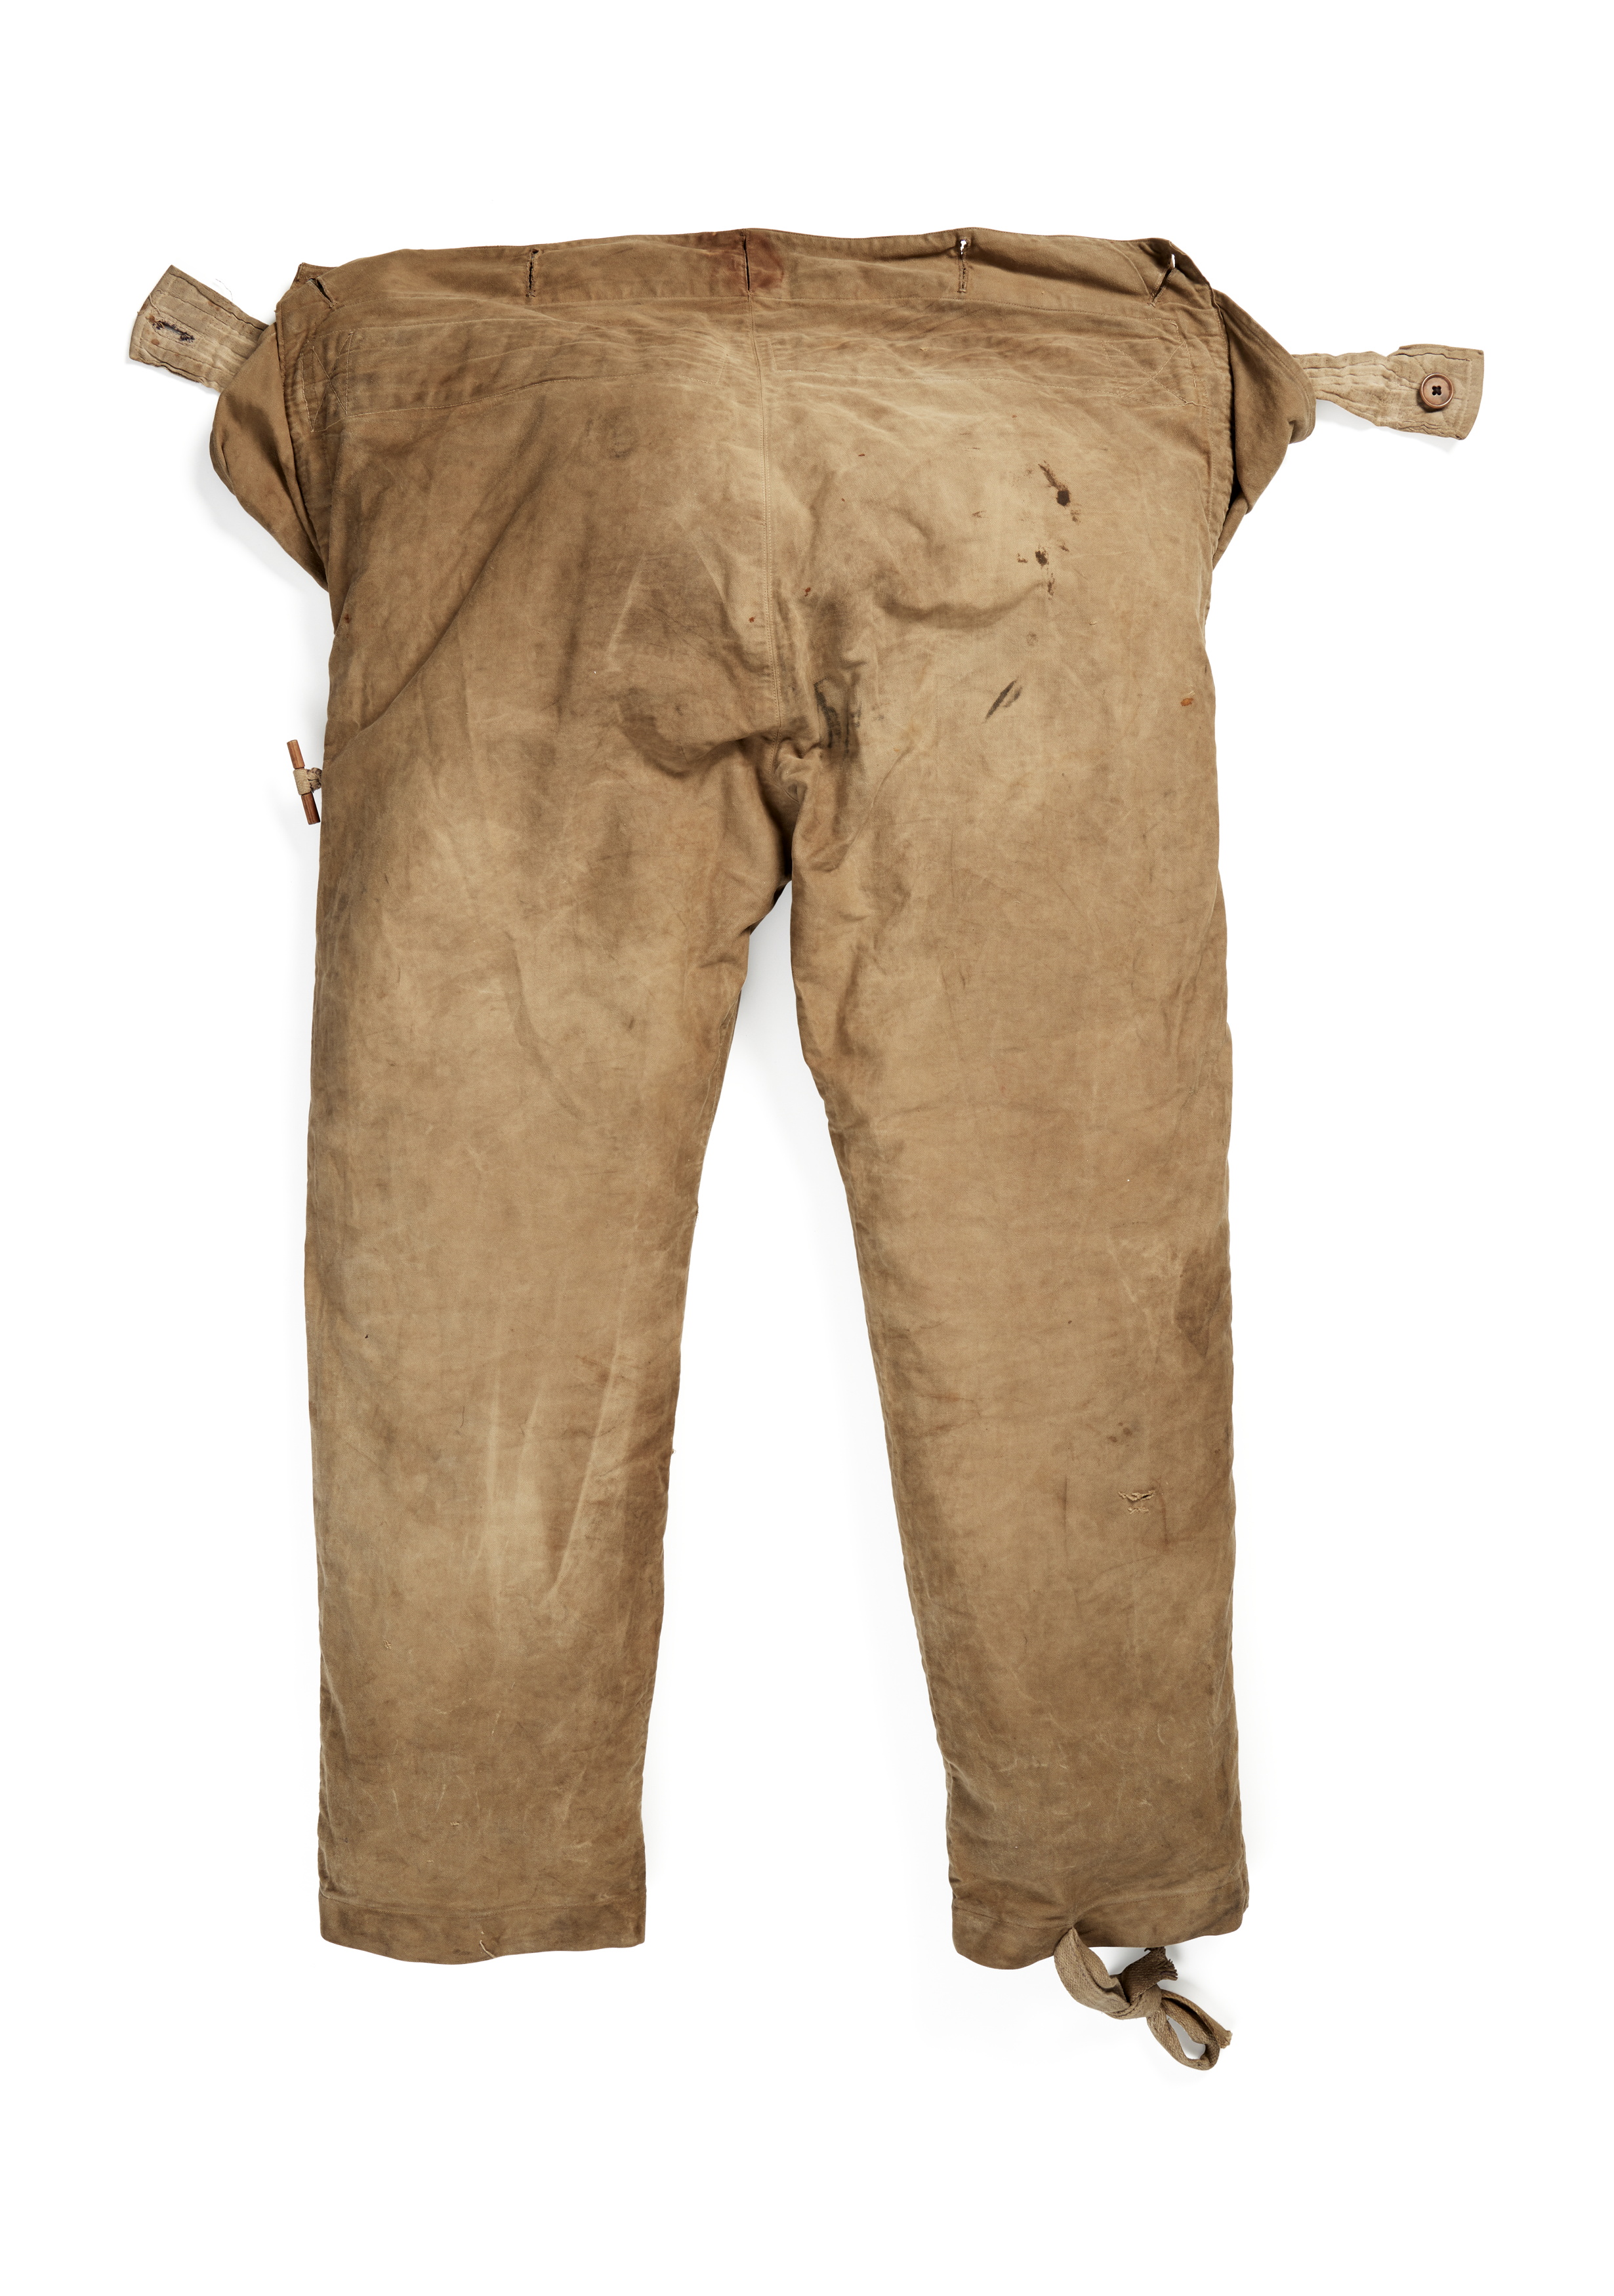 Trousers worn by Charles Laseron during Mawsons Australasian Antarctic Expedition